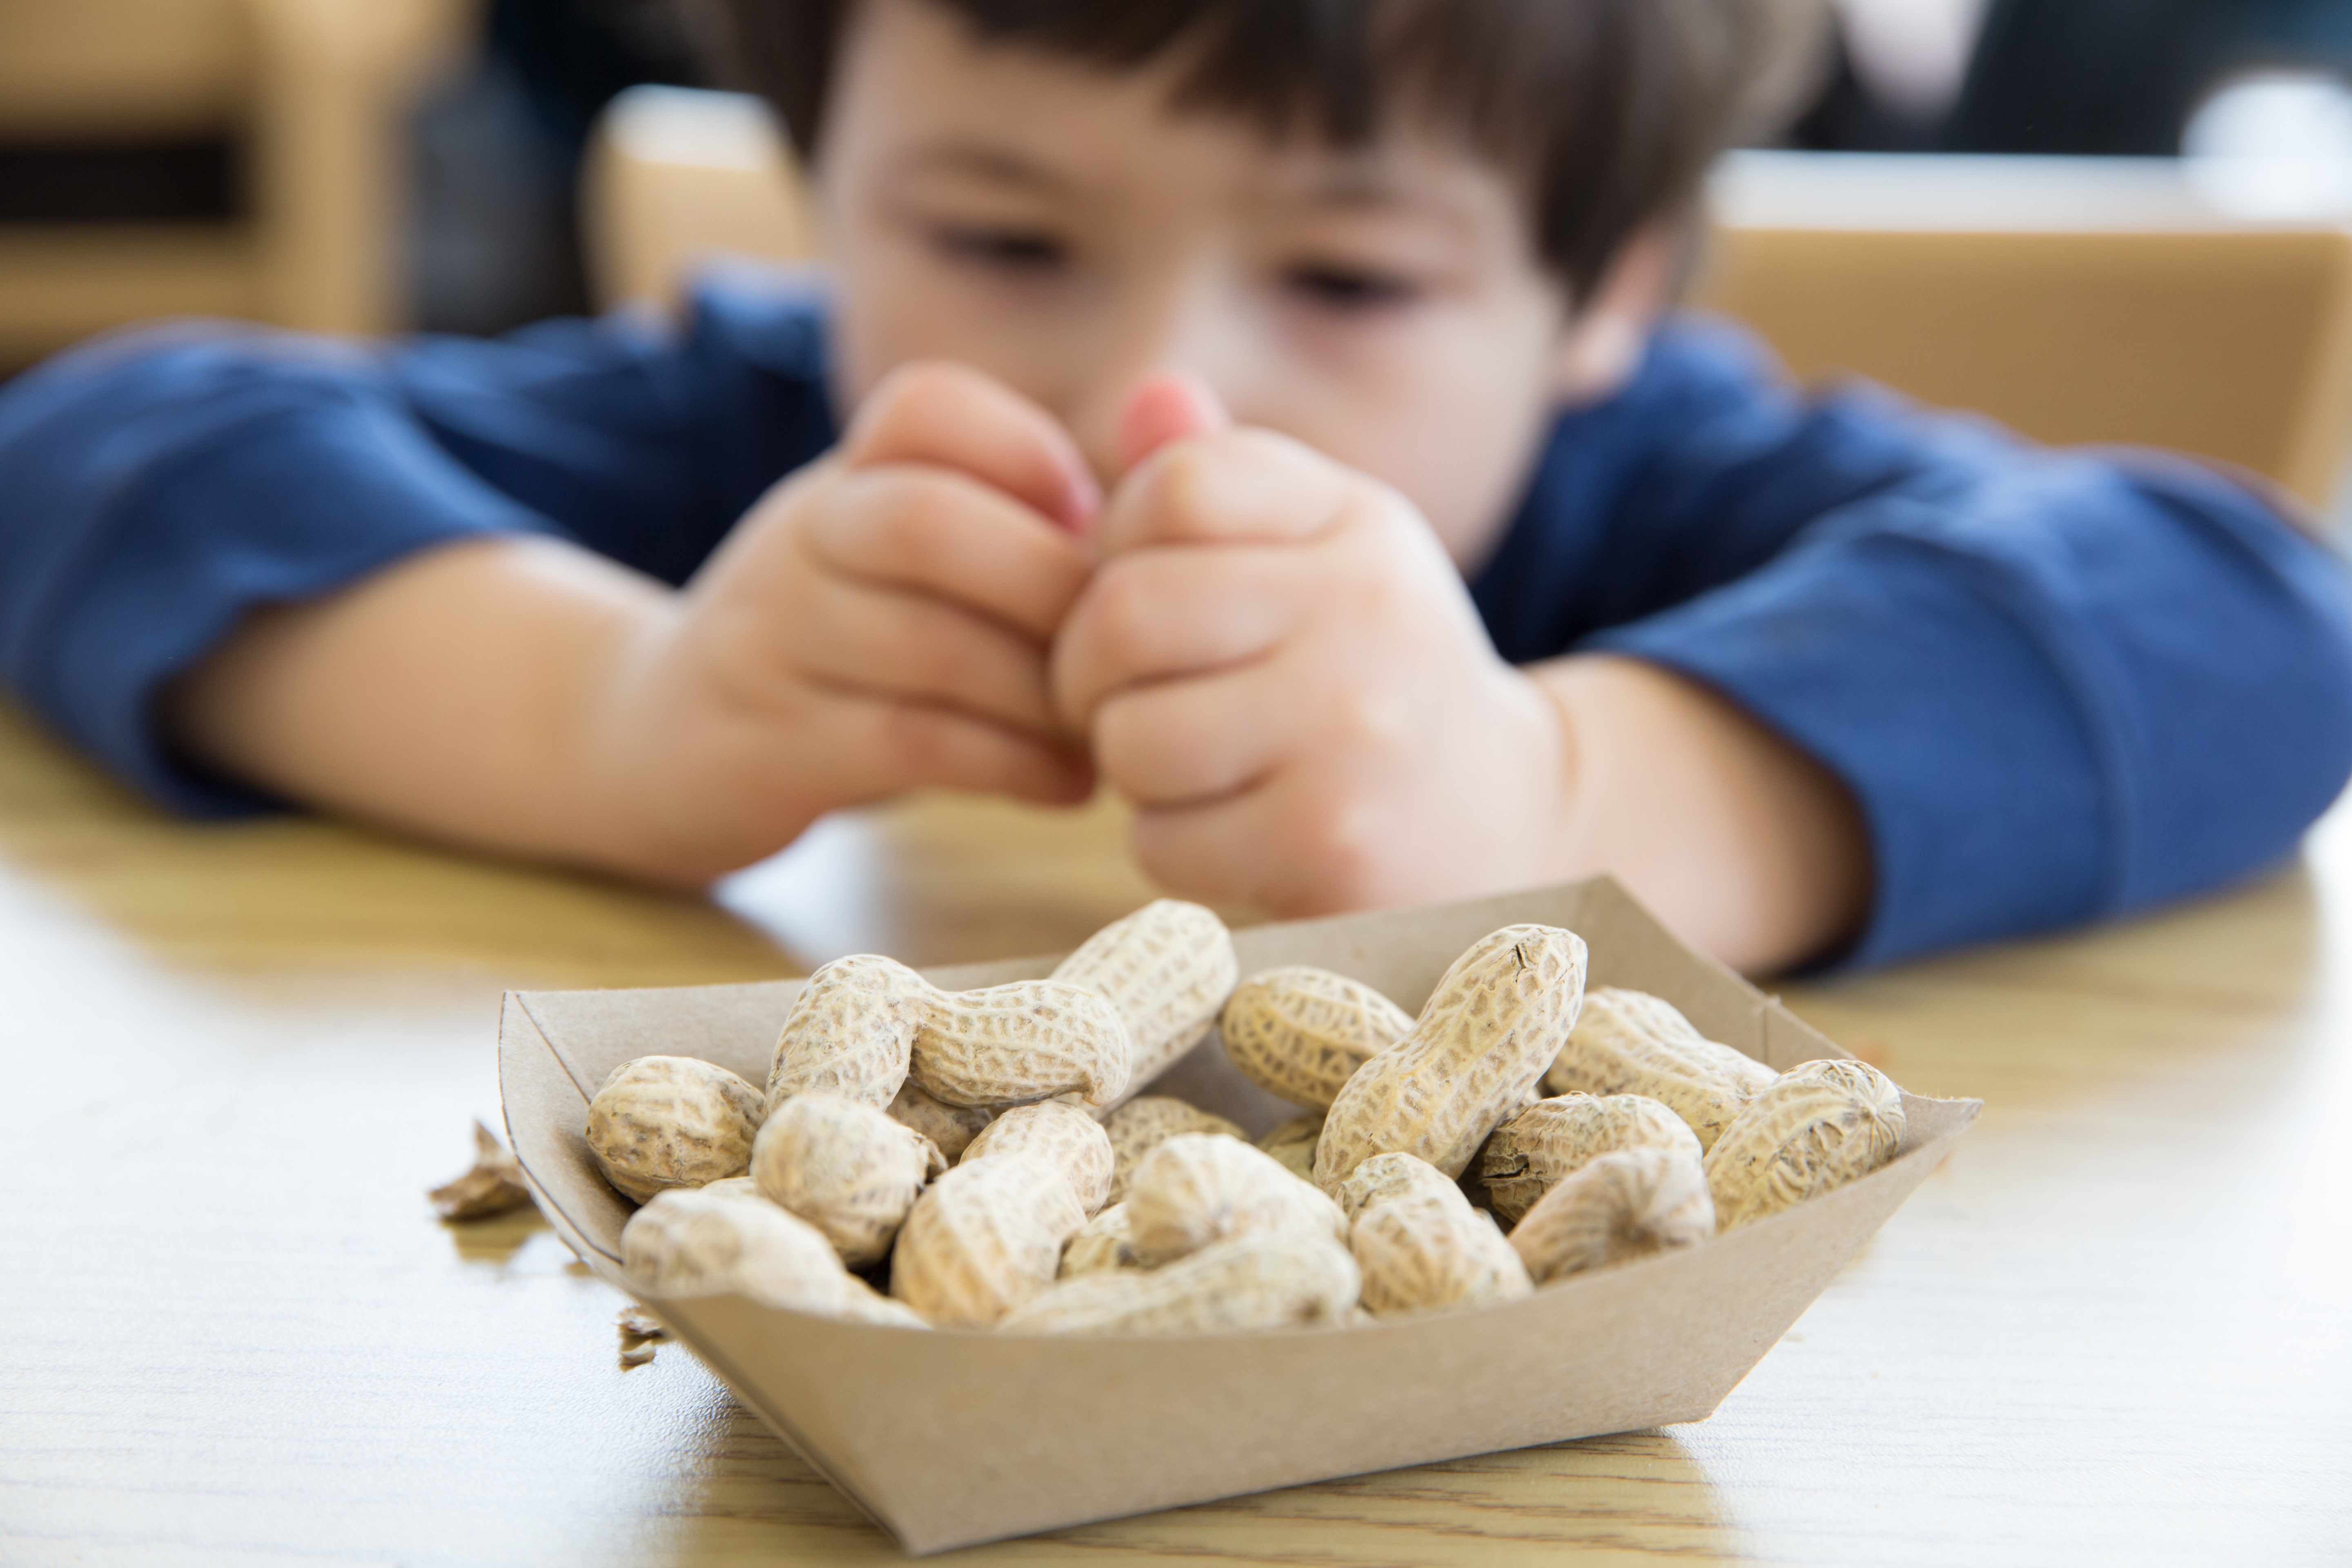 Child eating peanuts, which are one of the most common allergen foods.